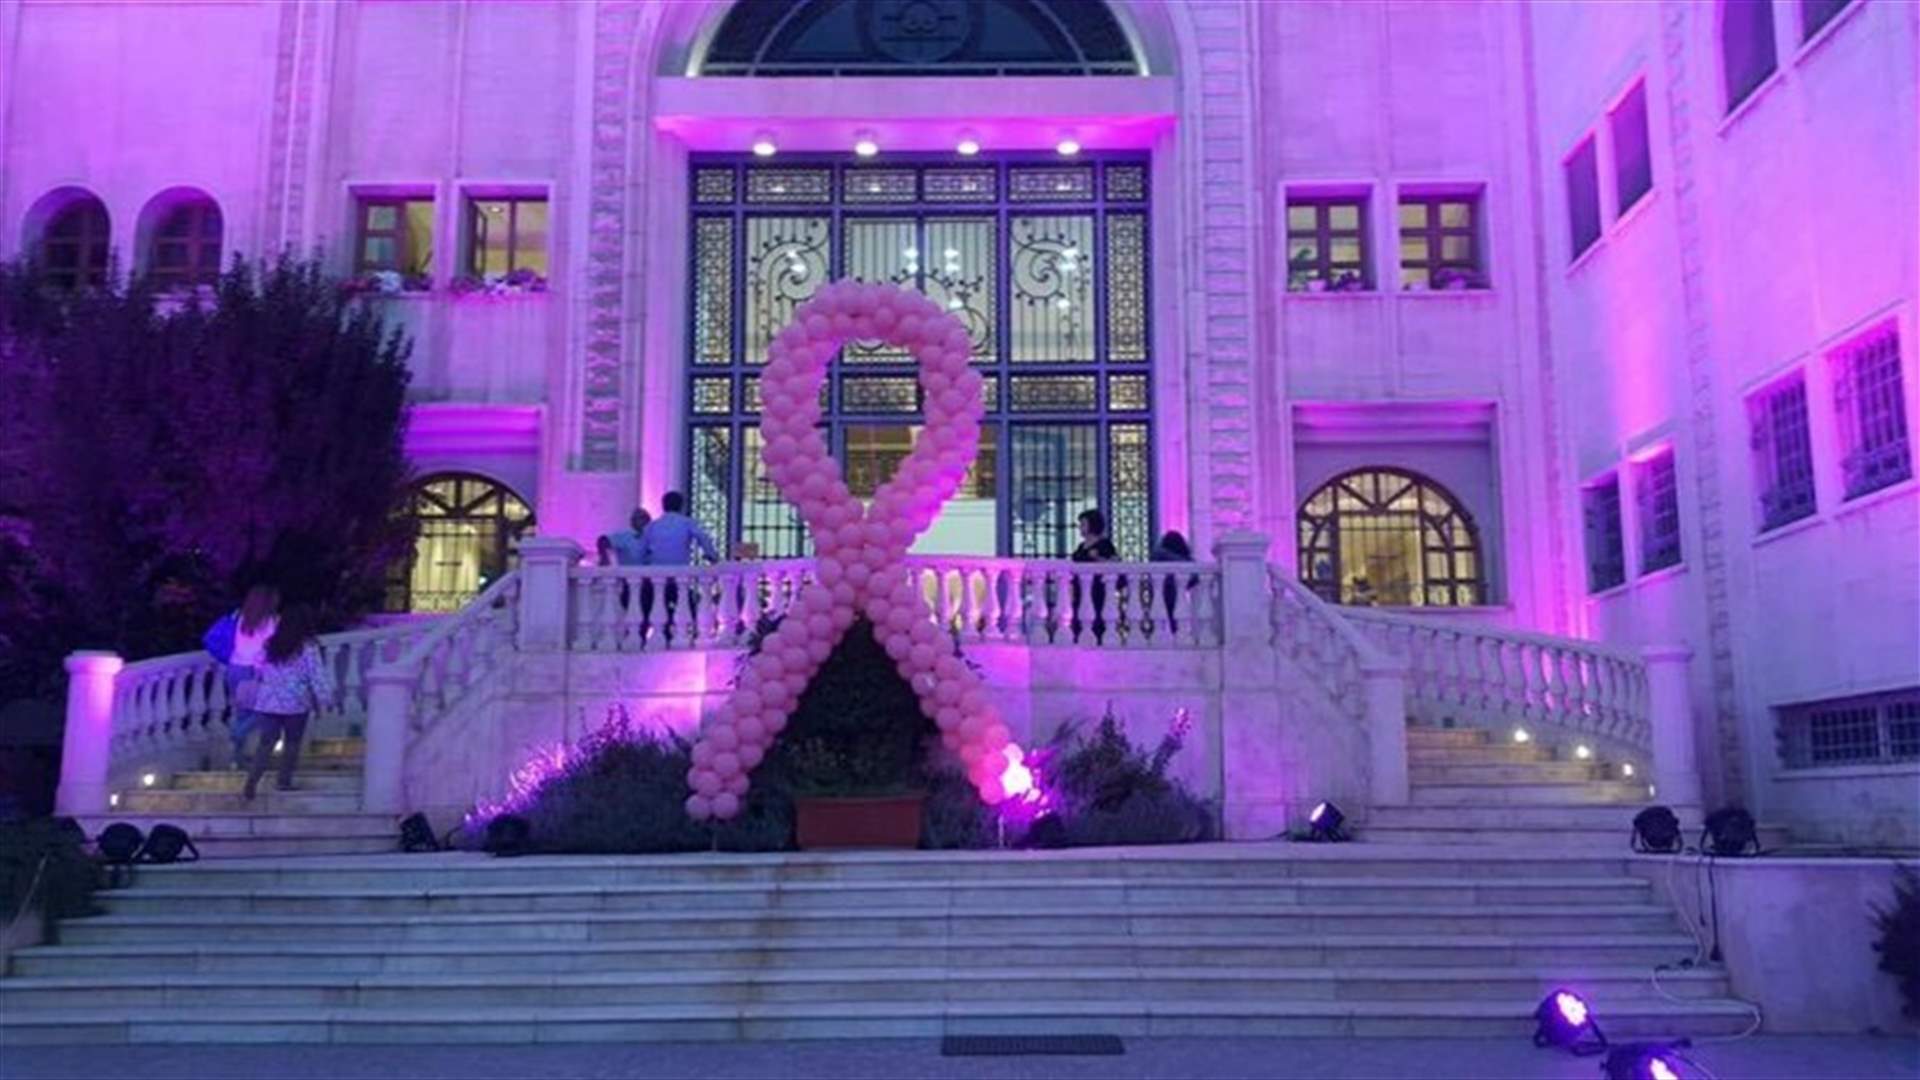 [PHOTOS] Zahle Maronite Archdiocese lit up in pink